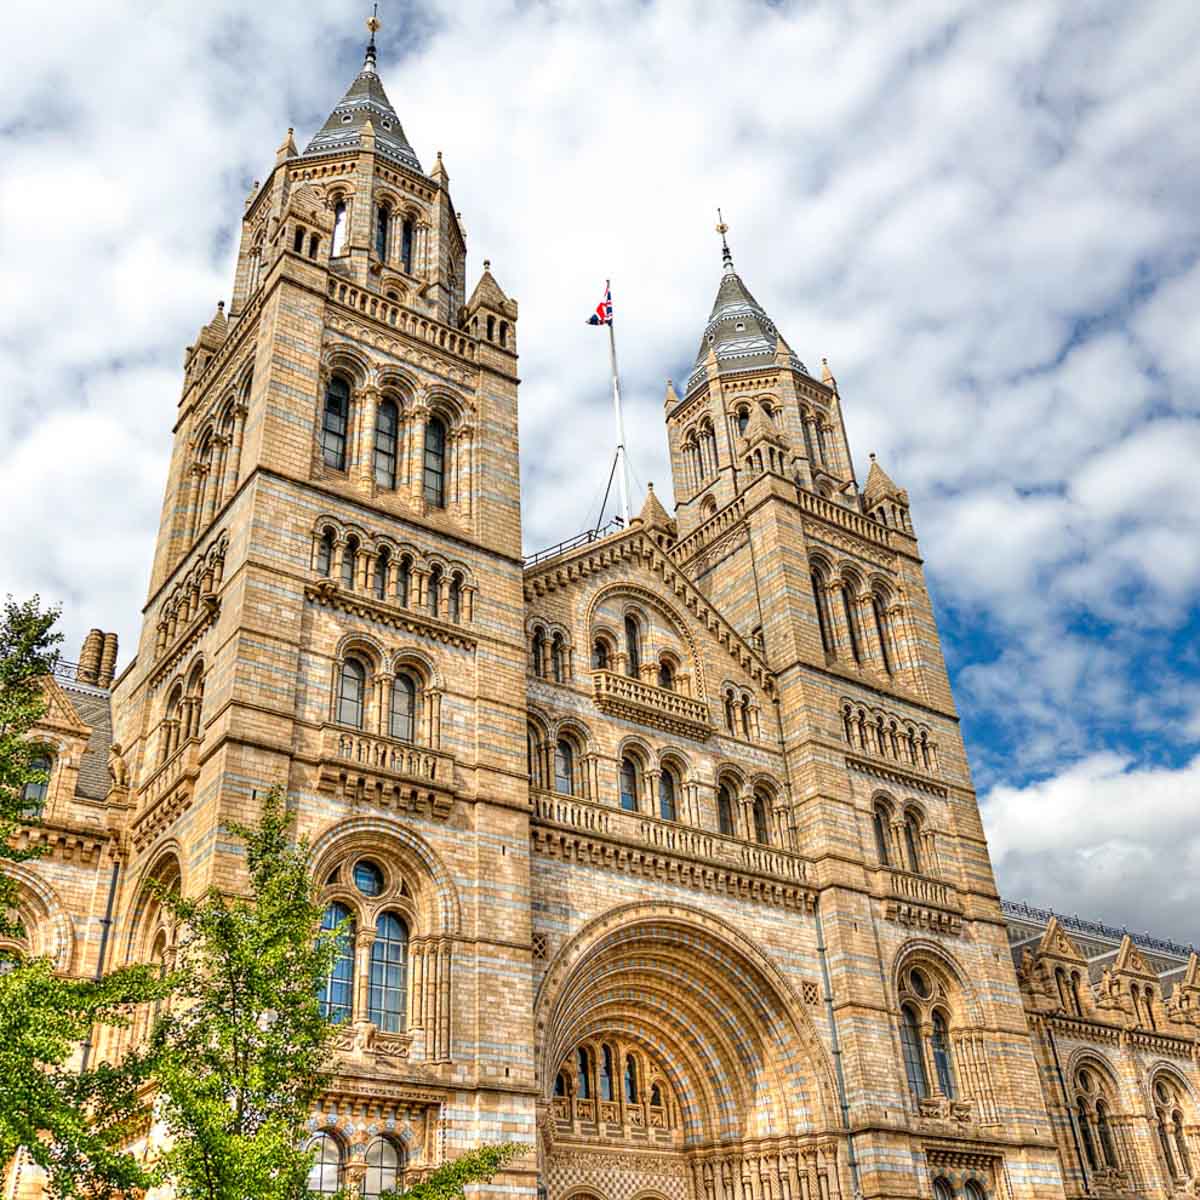 Exterior of the National History Museum in South Kensington - one of the best things to do in South Kensington with kids